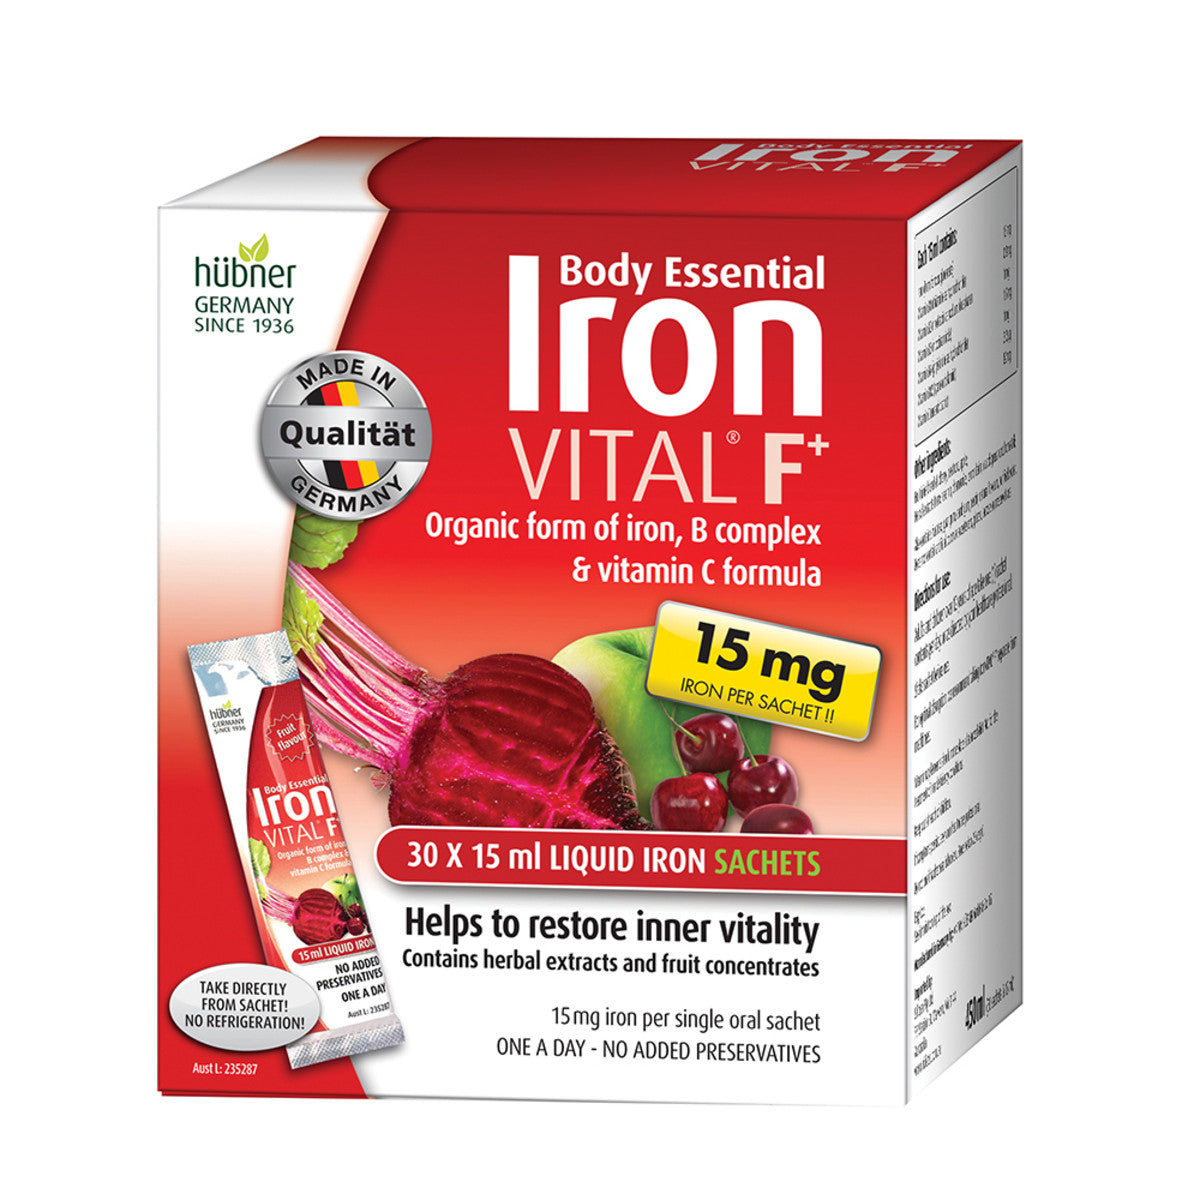 Silicea Body Essential Iron VITAL F+-The Living Co.